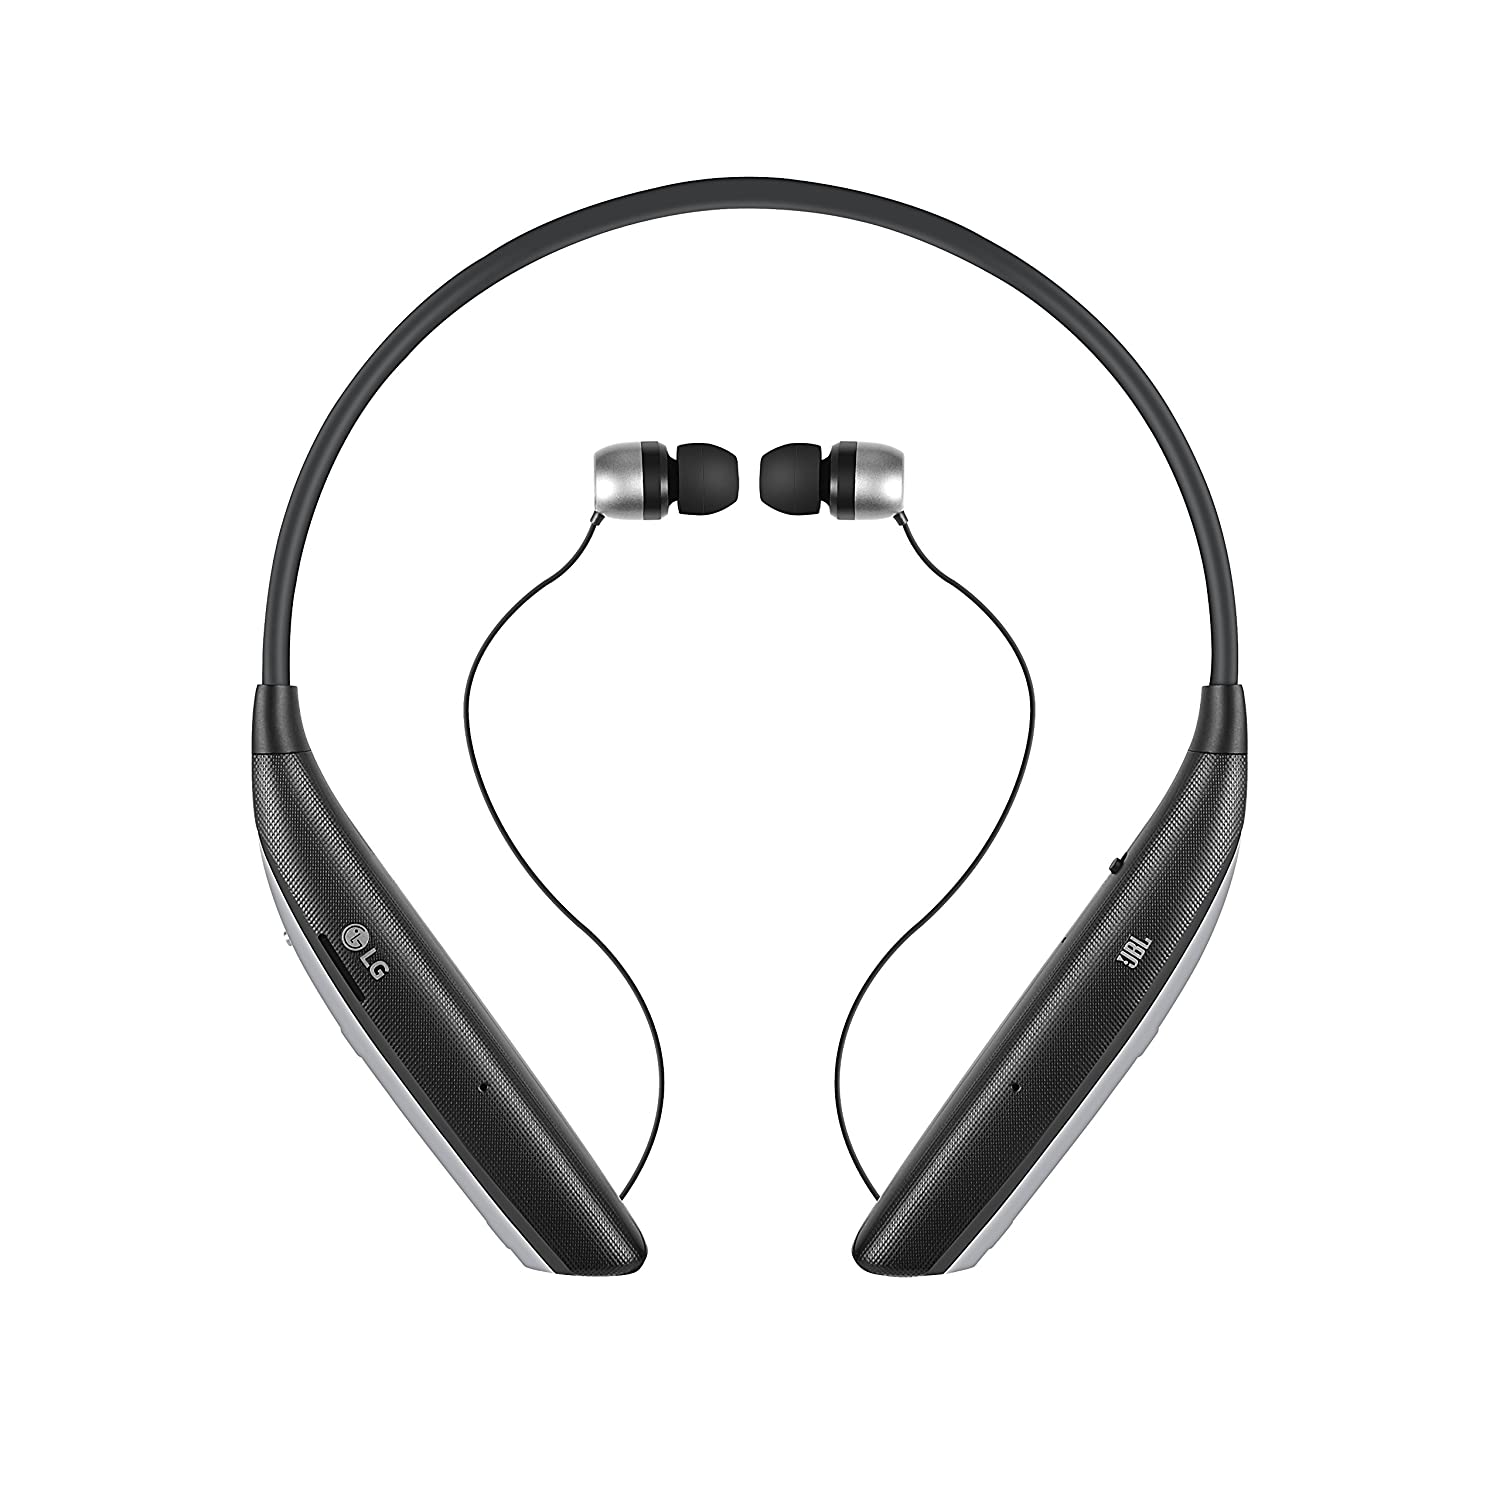 Auriculares lg hbs-820s blk